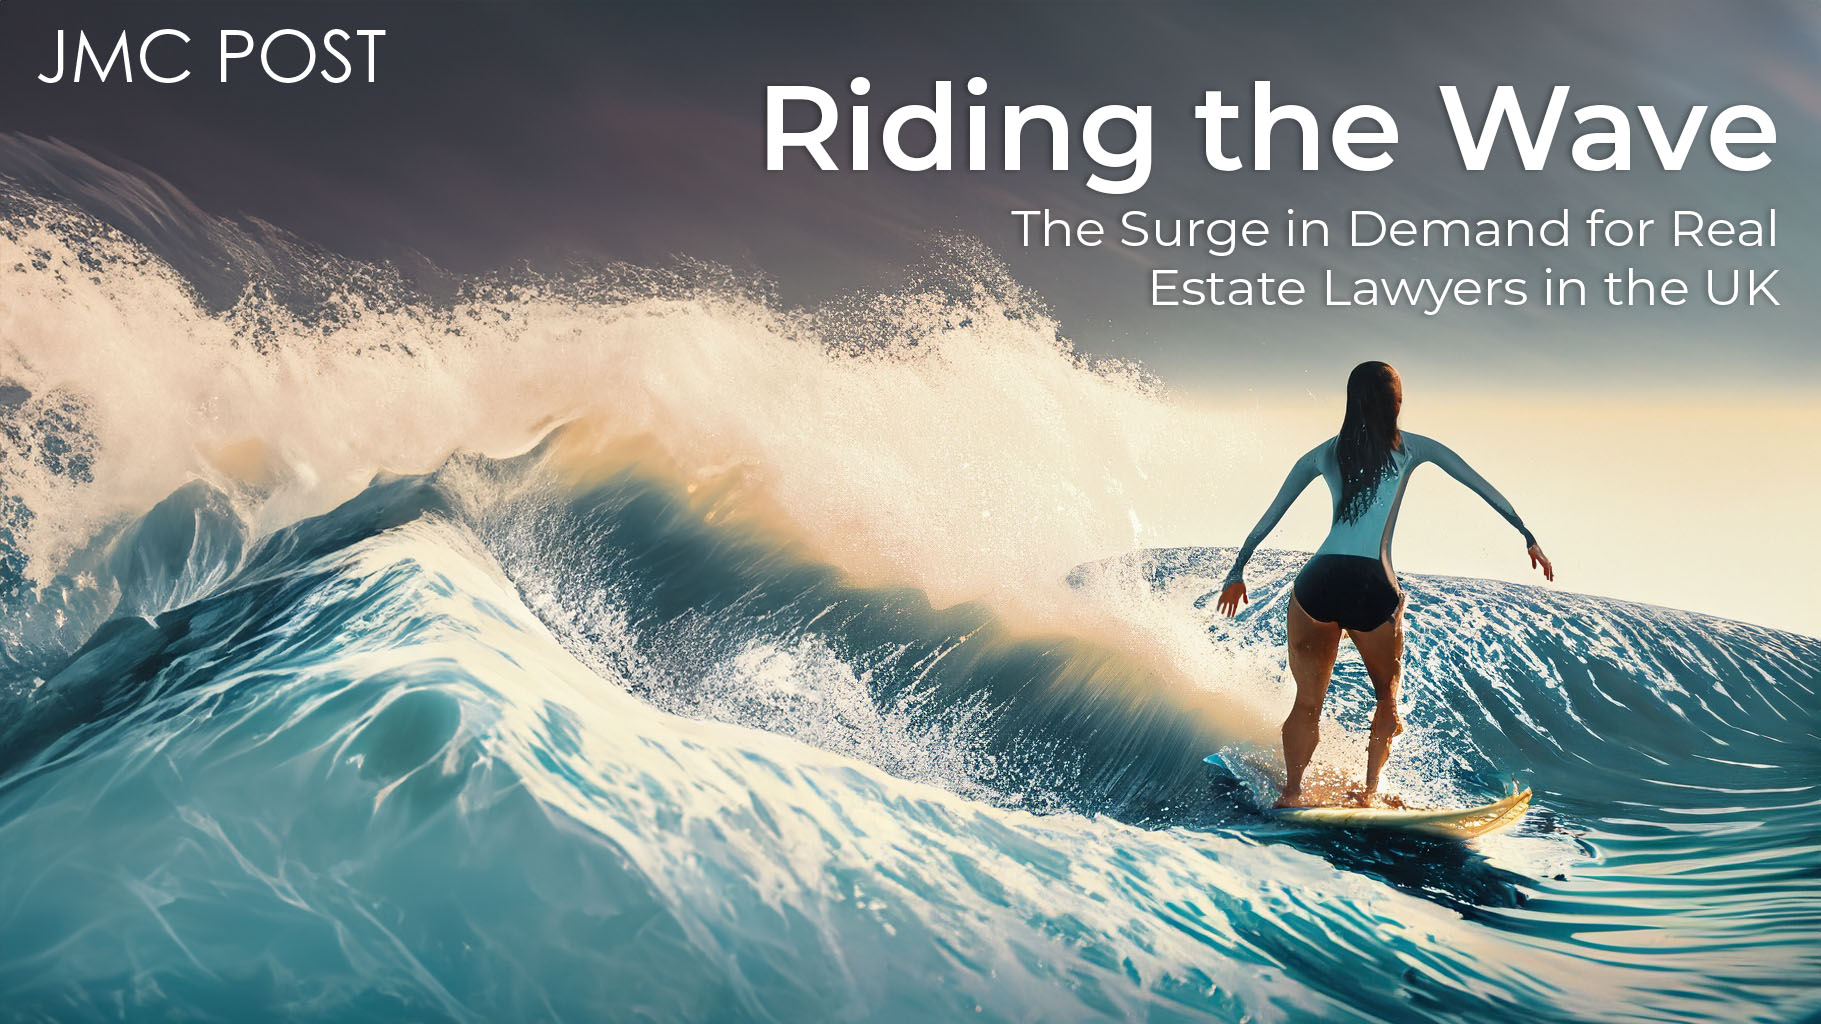 Riding The Wave: The Surge in Demand for Real Estate Lawyers in the UK